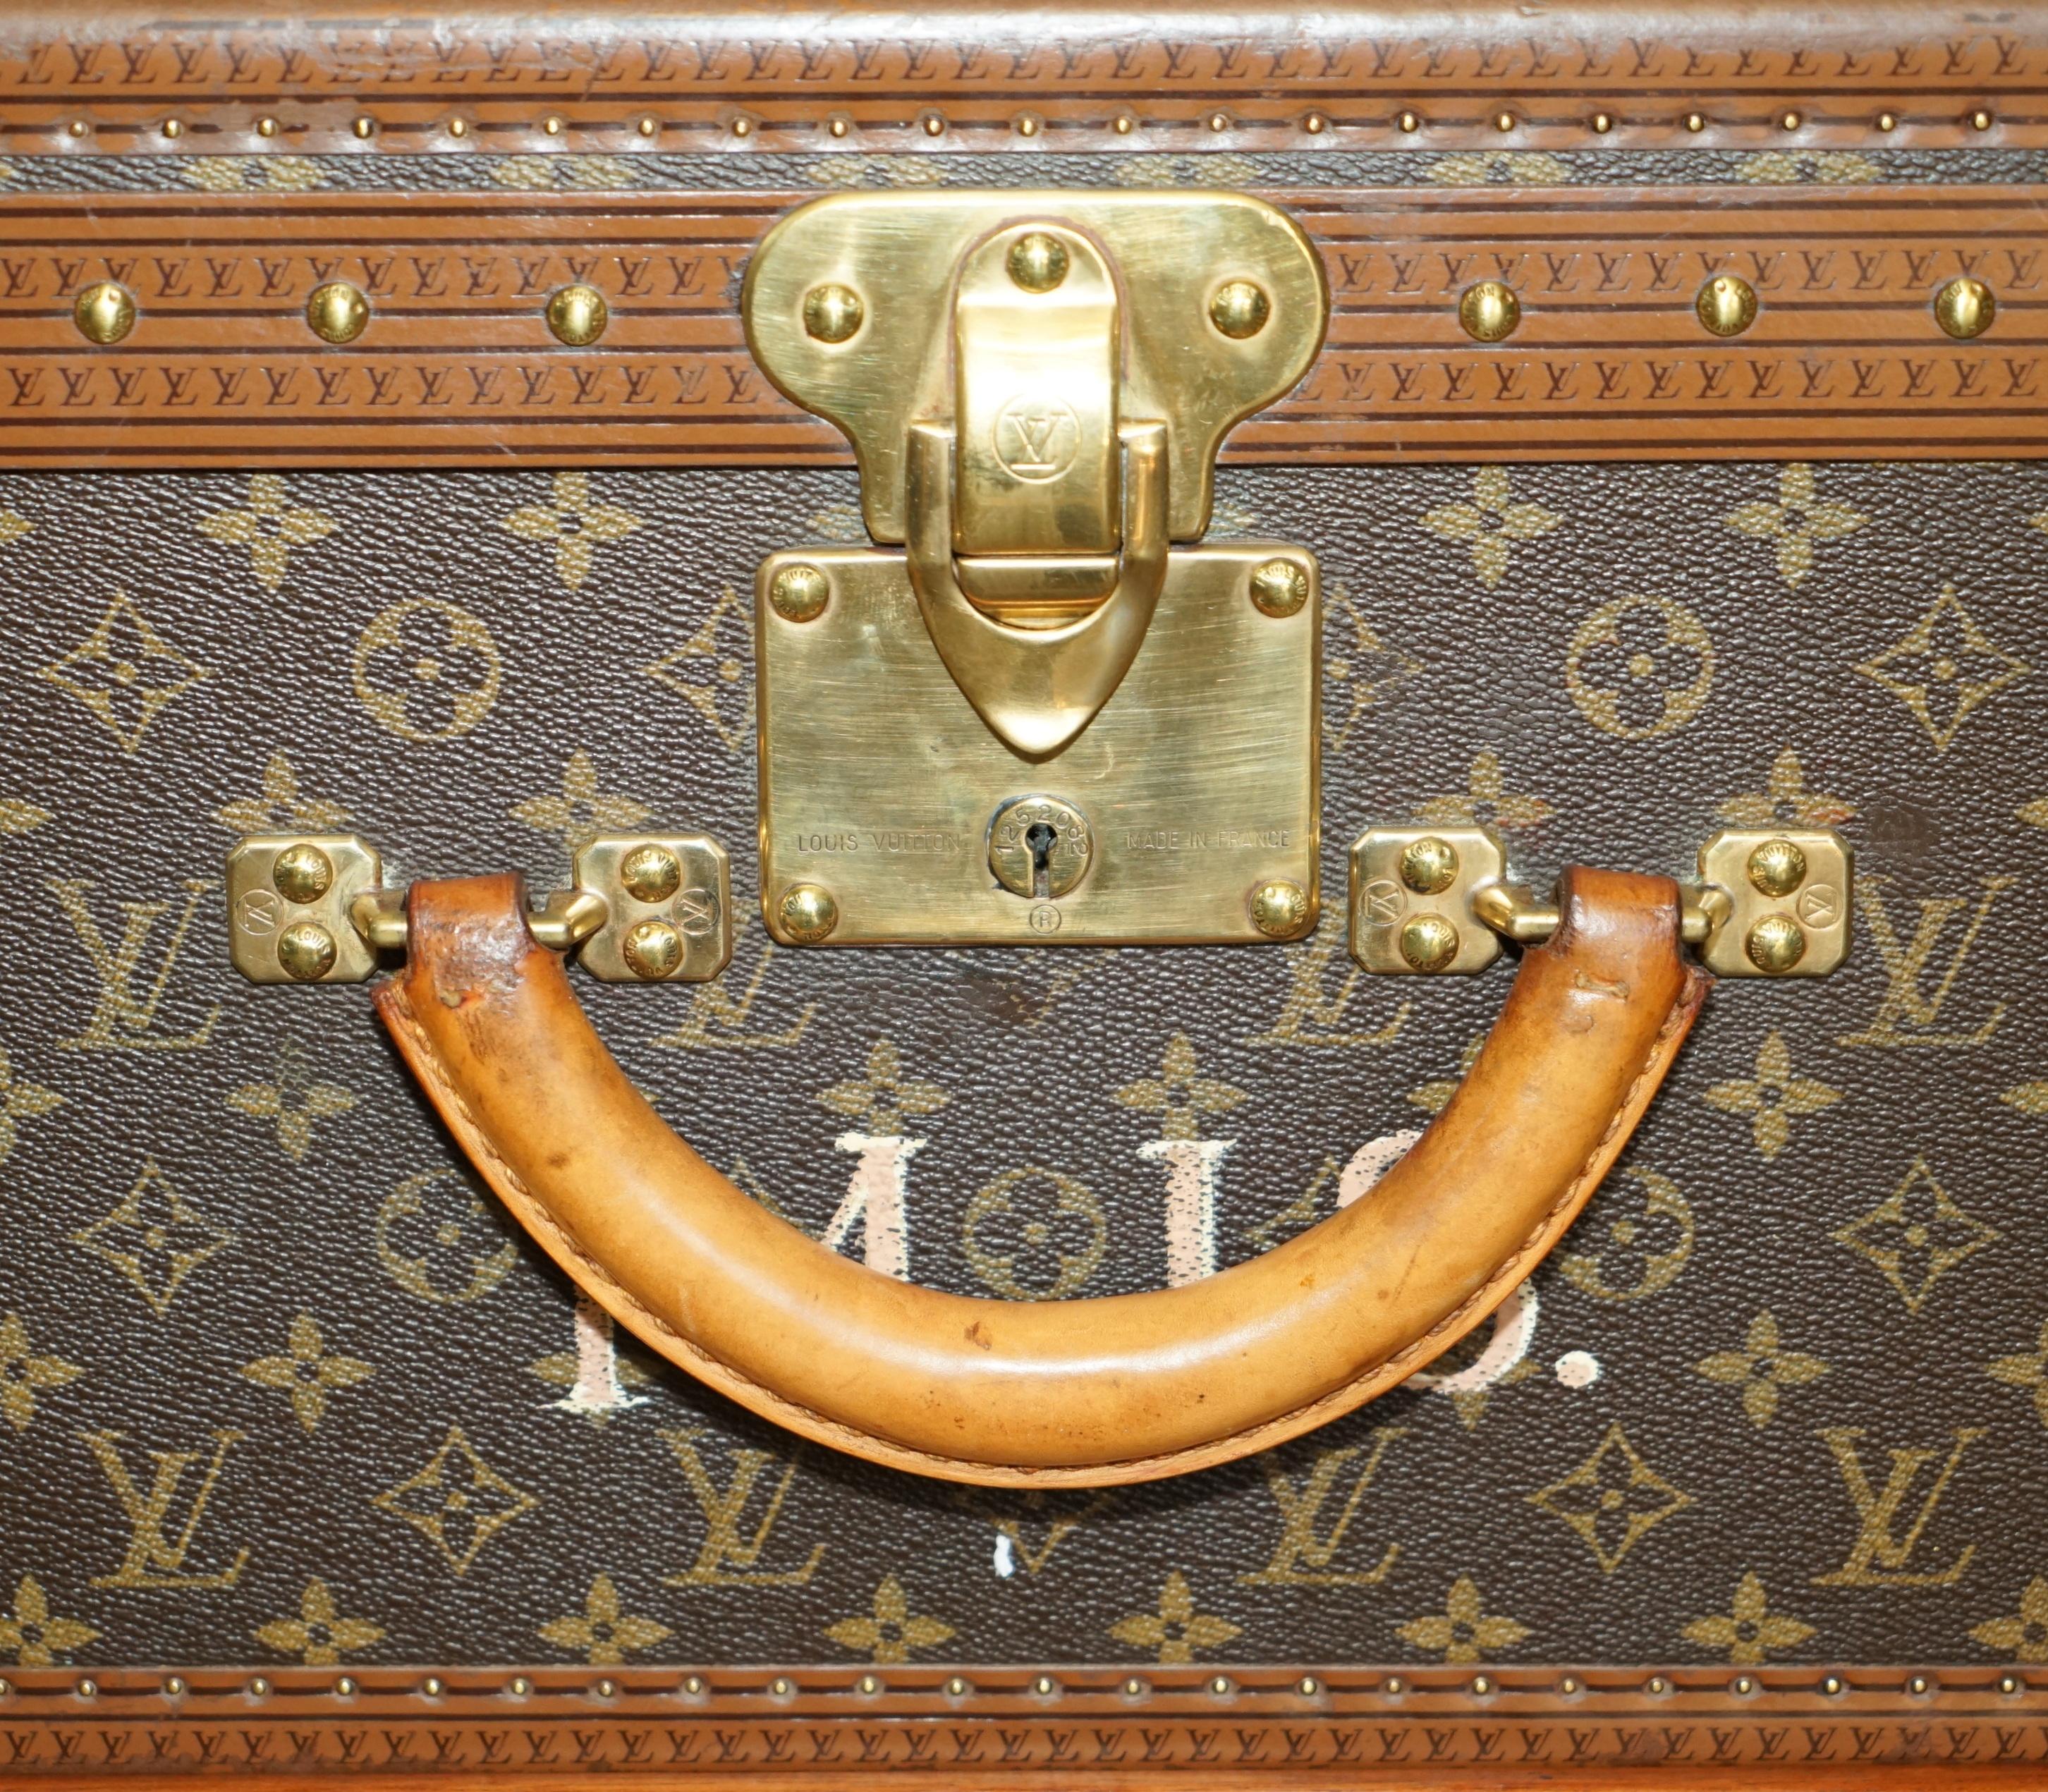 French FULLY RESTORED ViNTAGE BROWN LEATHER LOUIS VUITTON SUITCASE TRUNK COFFEE TABLE